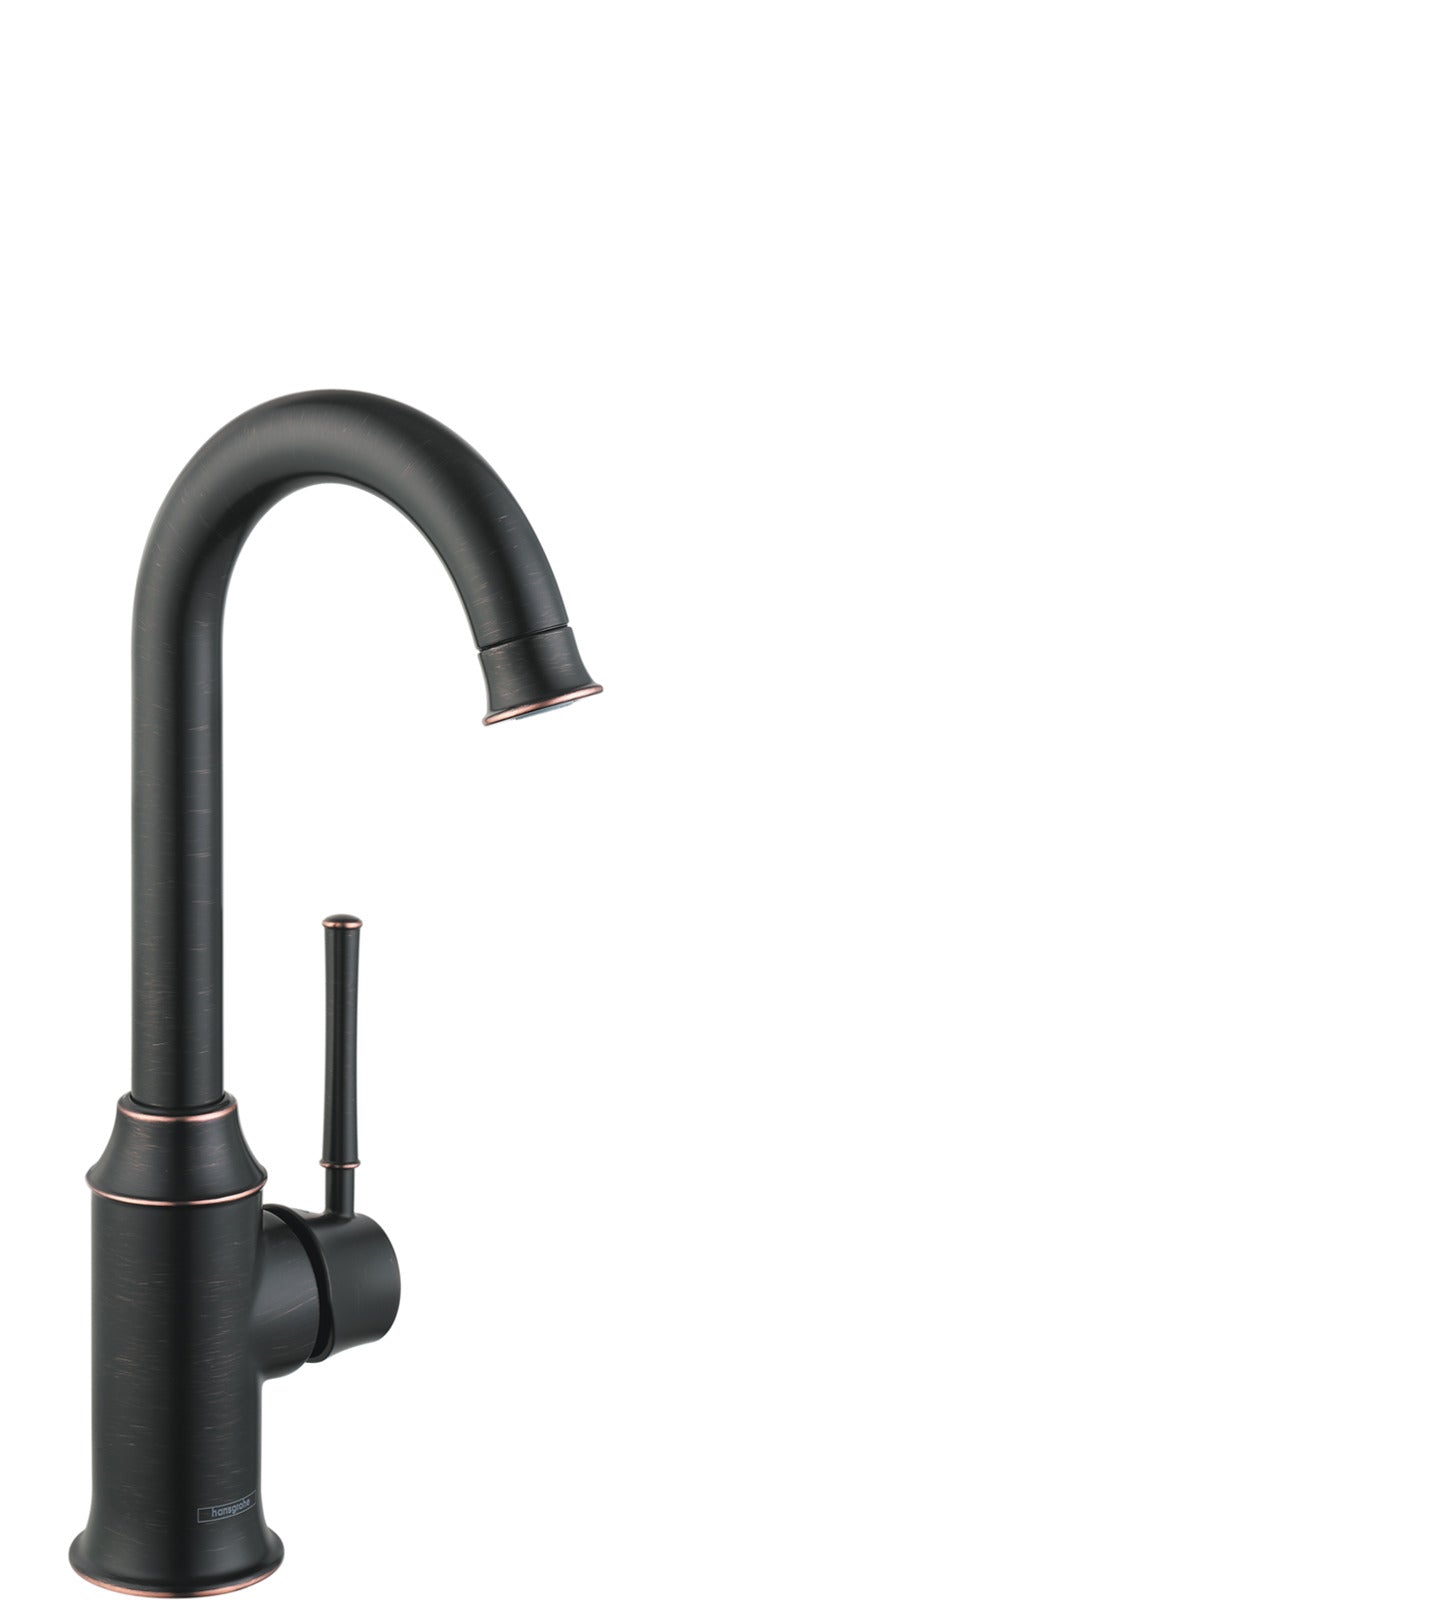 HANSGROHE 04217920 Rubbed Bronze Talis C Classic Kitchen Faucet 1.5 GPM